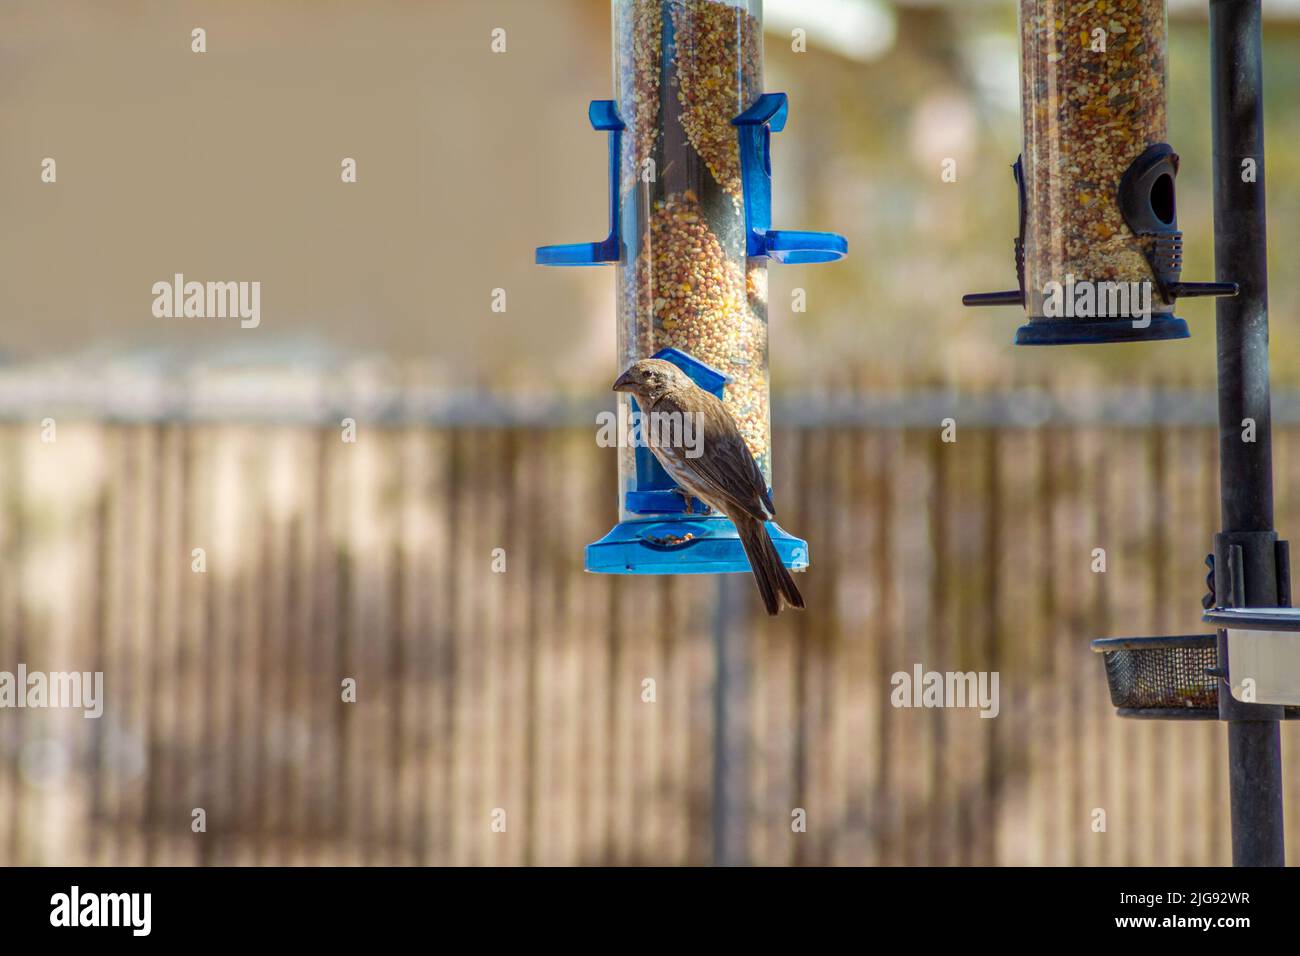 A House Finch perched on a bird feeder Stock Photo